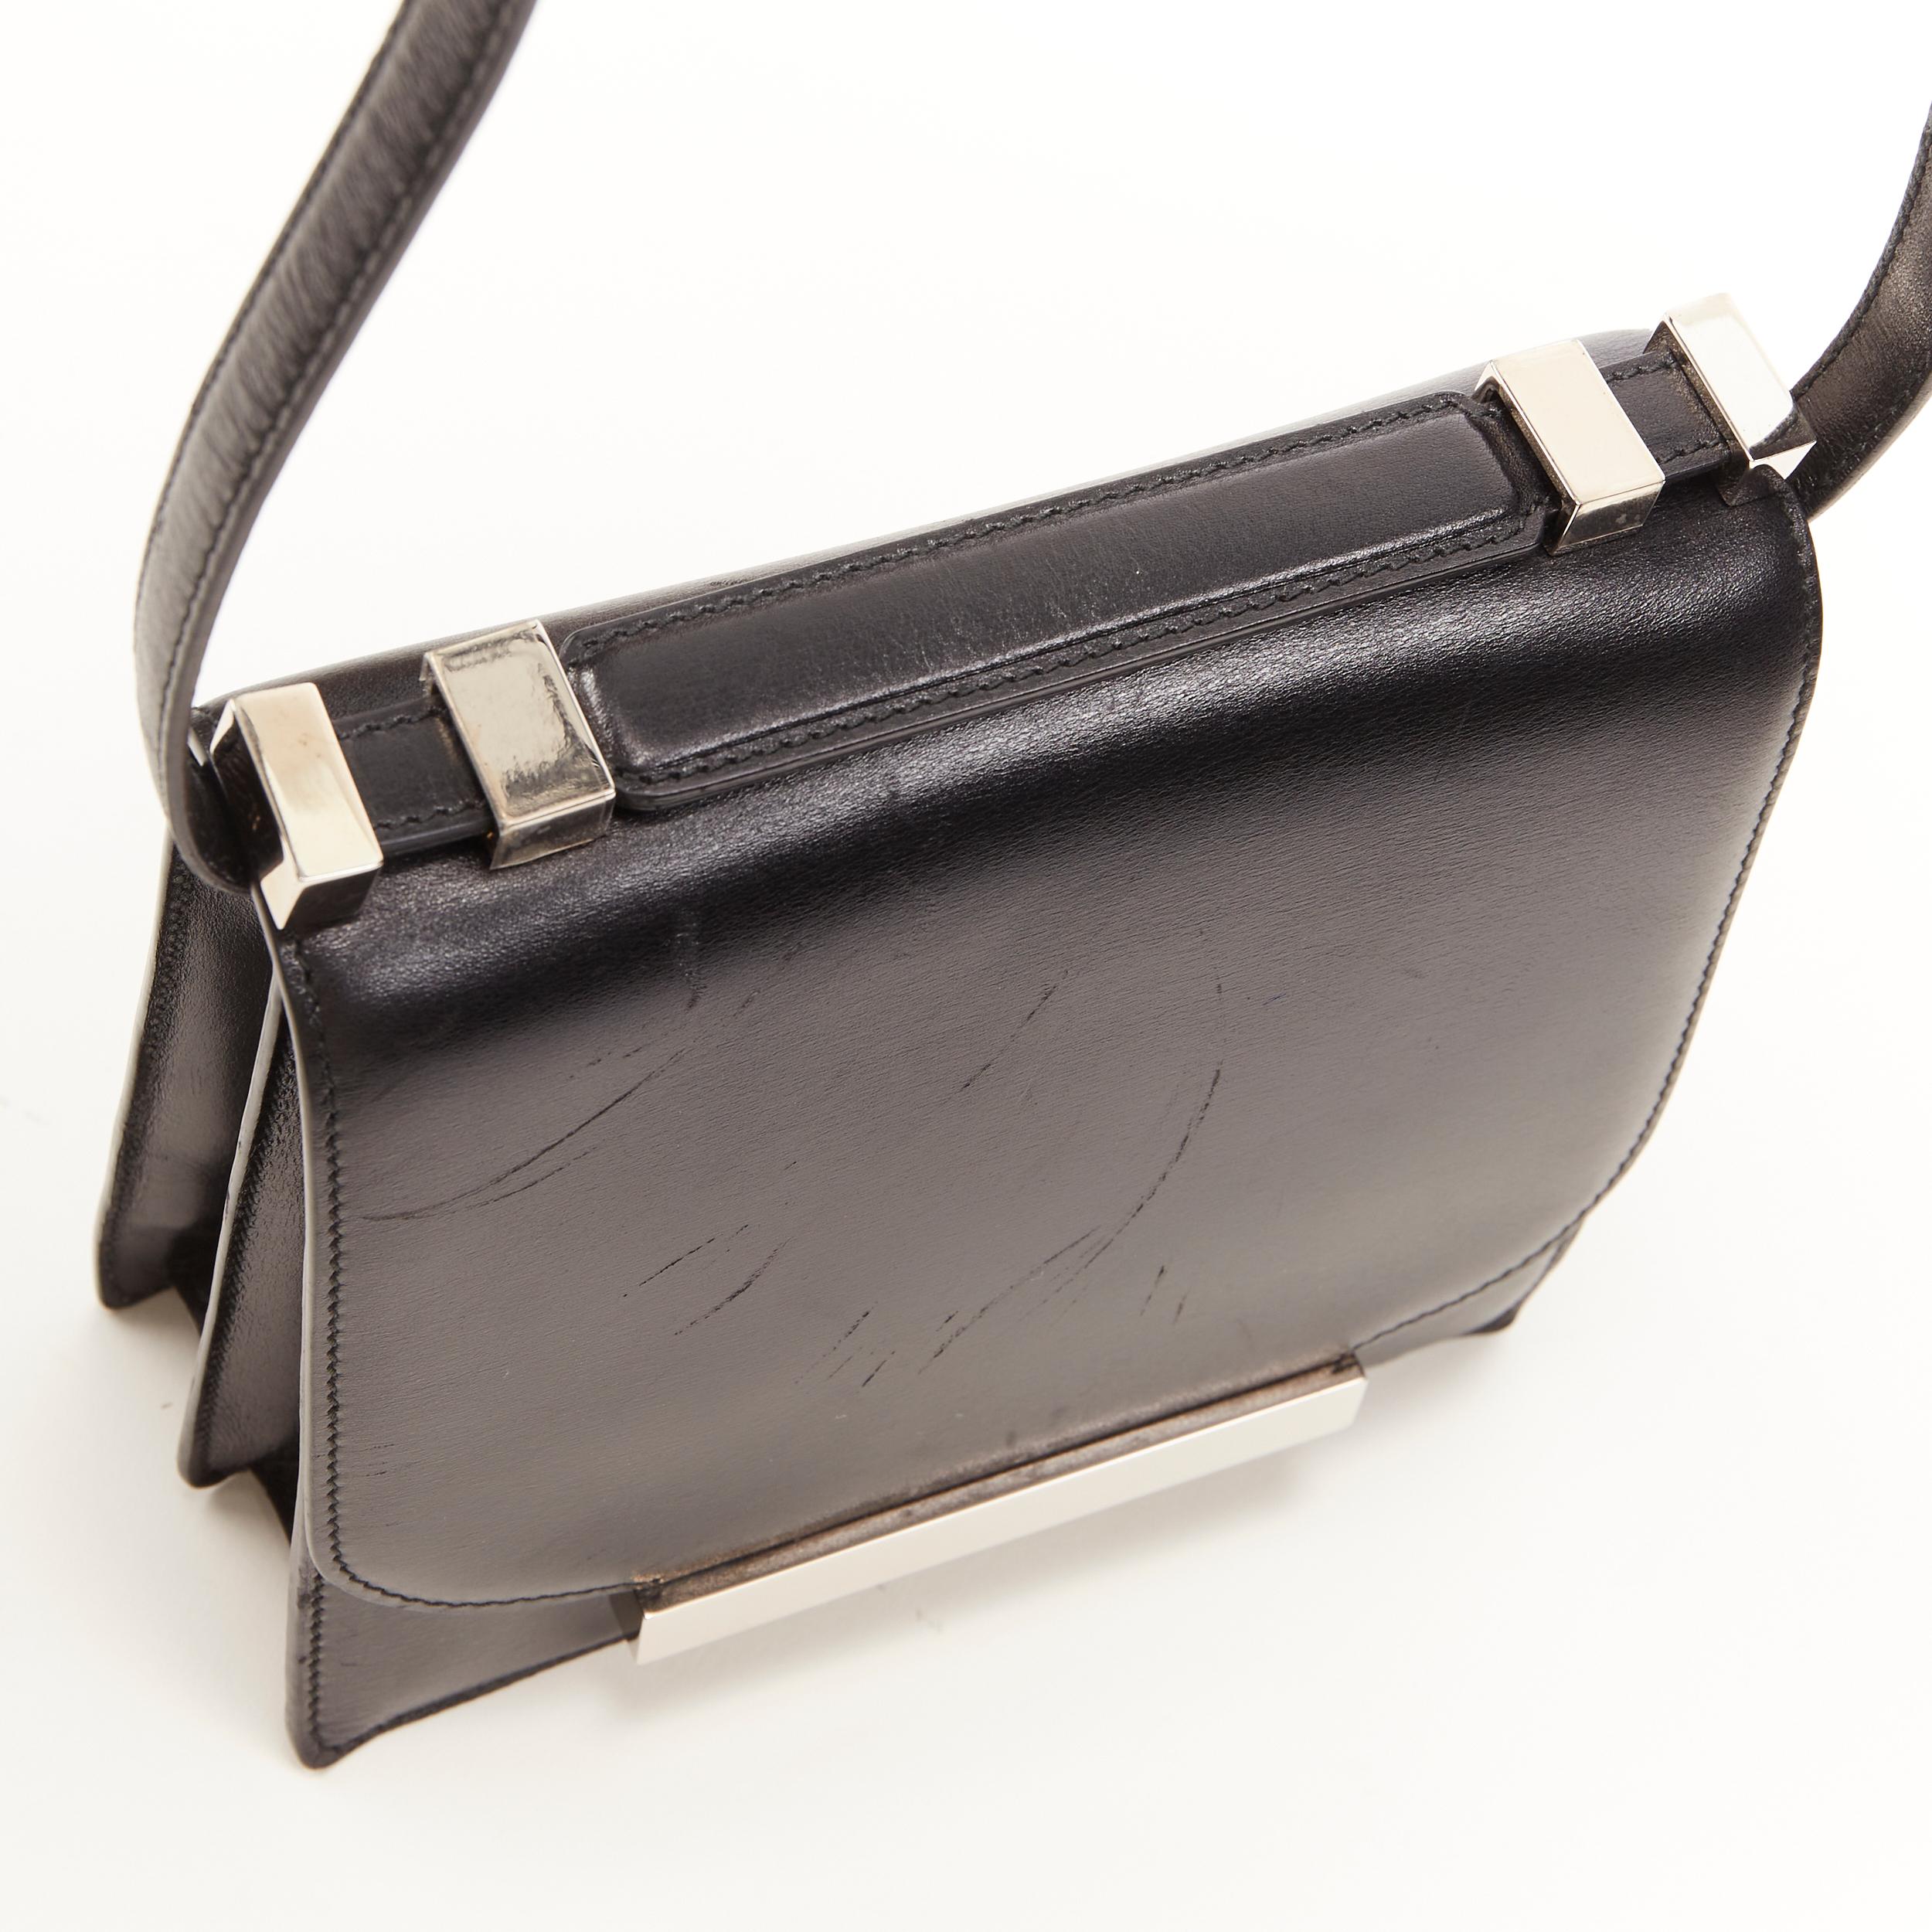 Women's THE ROW black smooth leather silver-tone hardware push lock flap shoulder bag